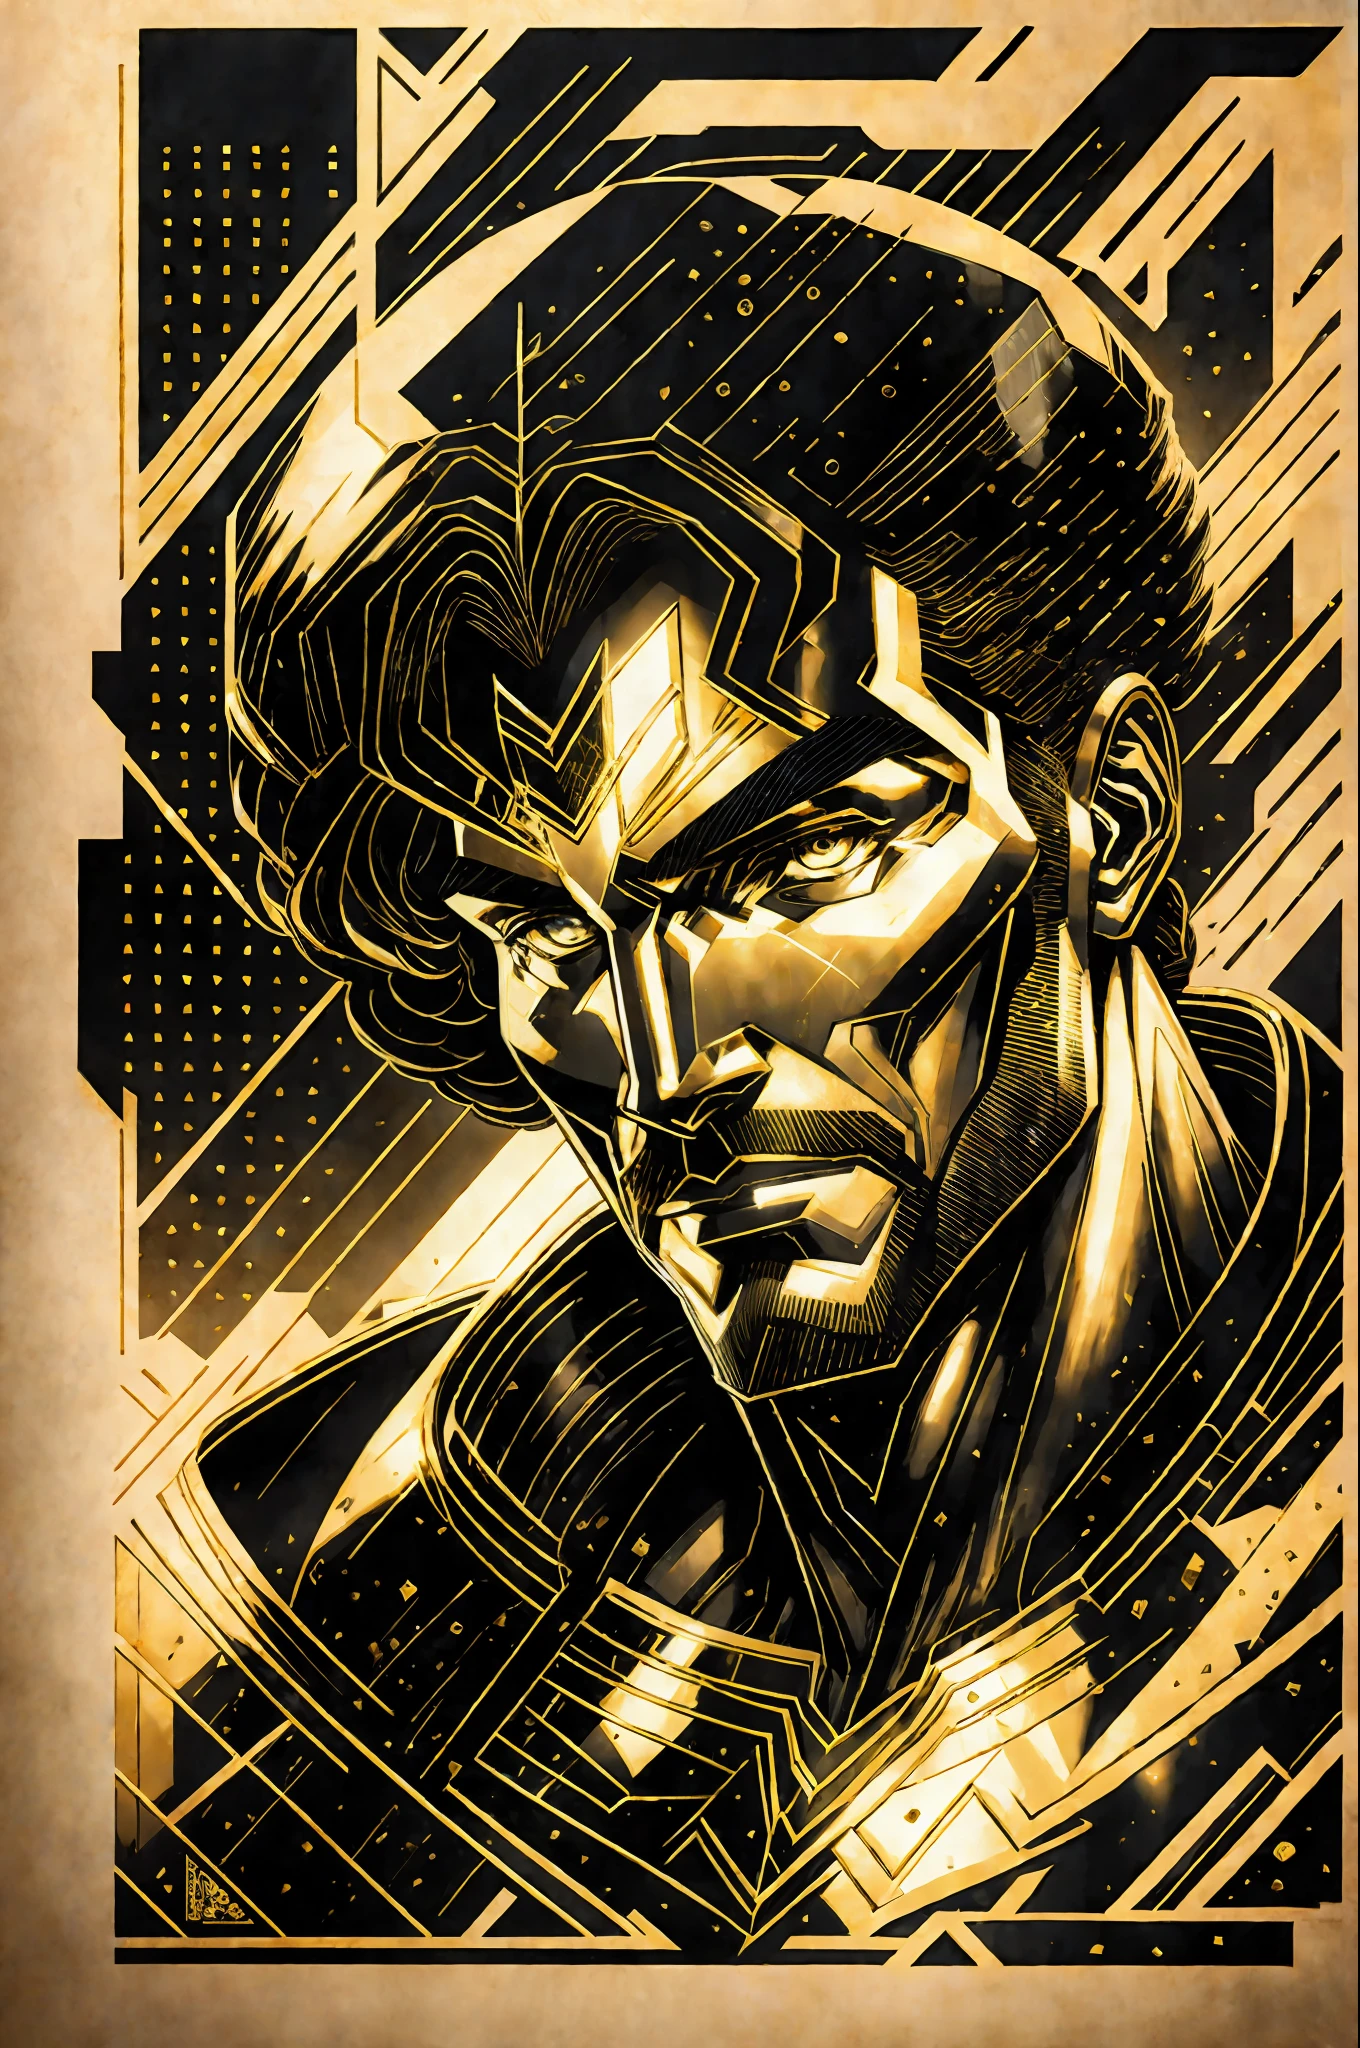 [gold and black Superman poster; solo] + [vector art + [inspired by Superman] + [superman portrait] + [dc comics art style, vector art, superhero portrait] + [dynamic line work] + [Jim Lee-inspired vector art featured on behance, net art] + [ intense line art] + [comic art style] + [vector ink drawing] + [crisp line work] + + [Vectorized] + [Silk screen print, serigraph, planographic engraving] + [Vector Painting] + [on Black Background: 1.4] Size: 512x512, Steps: 15, Sampler: DPM++ 2S a Karras, CFG scale: 3, Seed resize from: -1x-1, Denoising strength: 0.3, Base Model SD 2.1 as a t-shirt logo in the style of --auto --s2